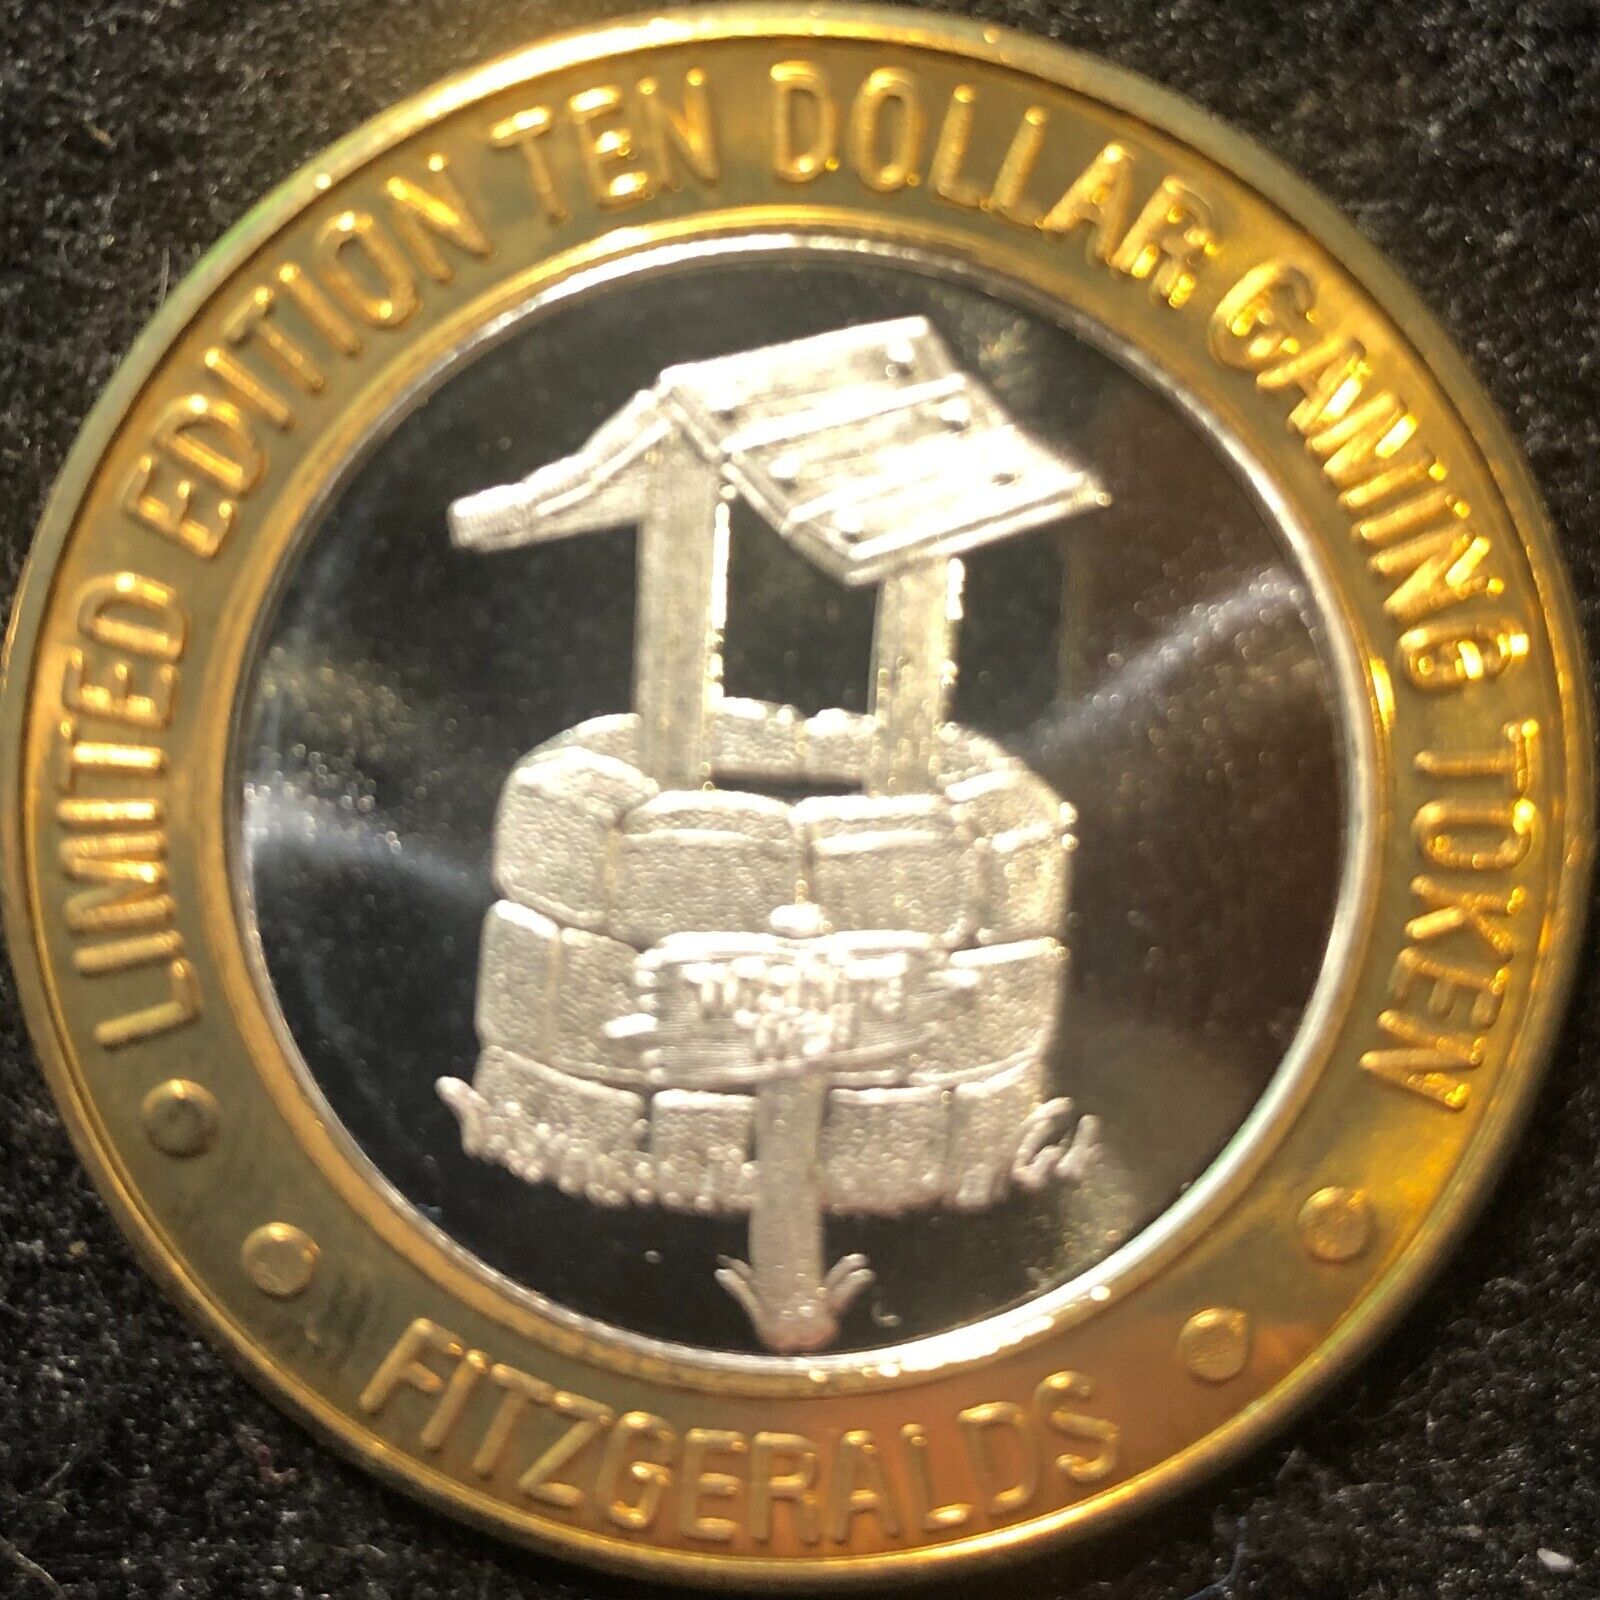 Fitzgeralds Hotel Casino $10 Gaming Token Chip .999 Fine Silver Limited Edition